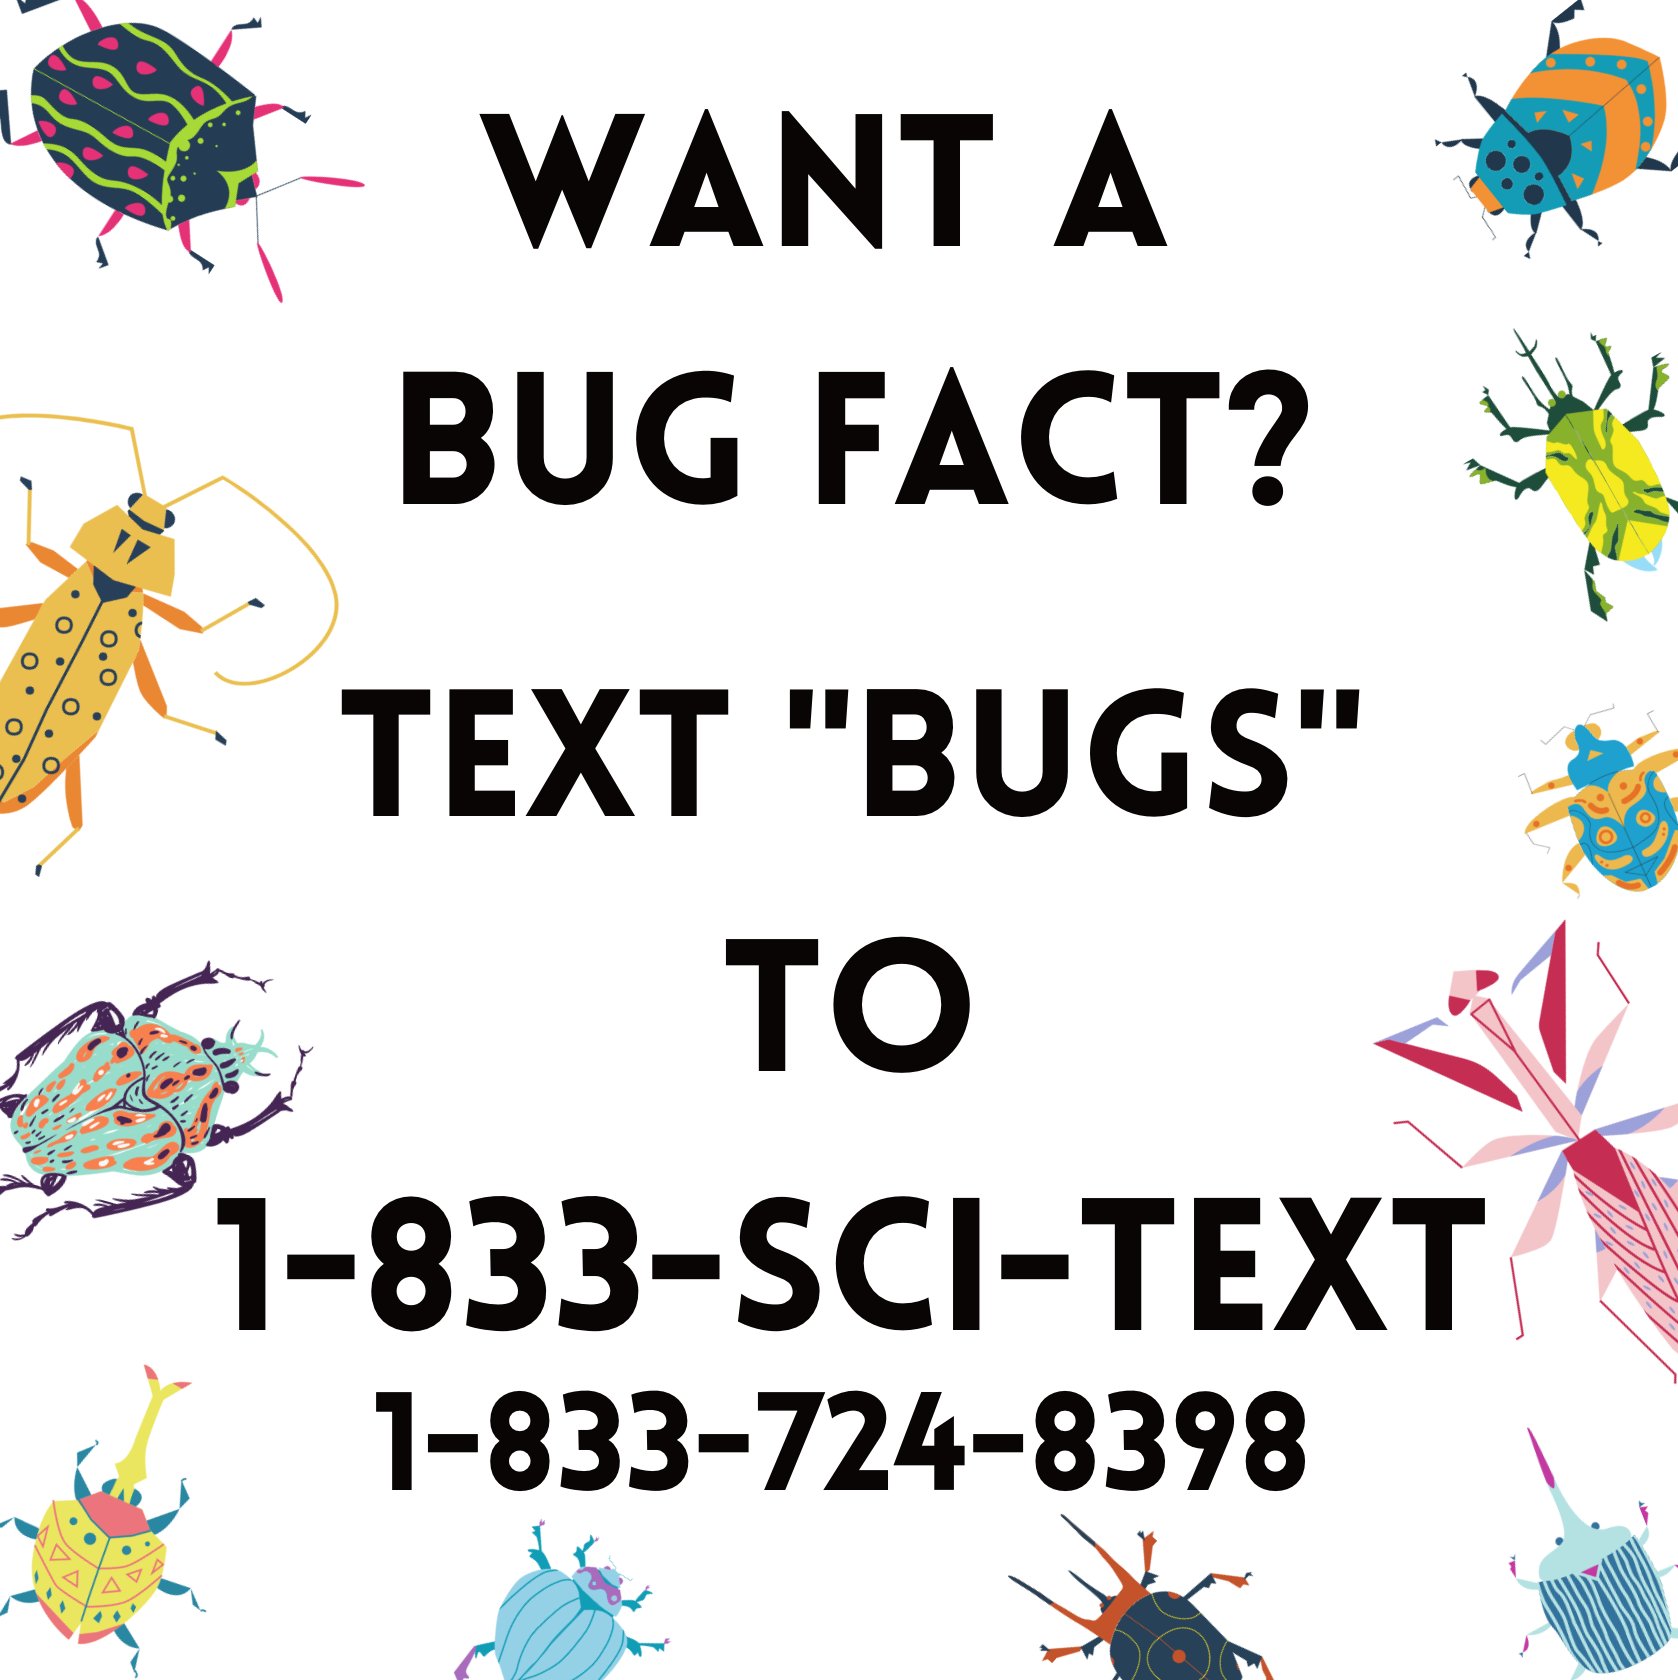 Want a bug fact? Text BUGS to 1-833-SCI-TEXT 1-833-724-8398 with a white background and 11 brightly colored bugs, all beetles except for one pink mantis surrounding the words